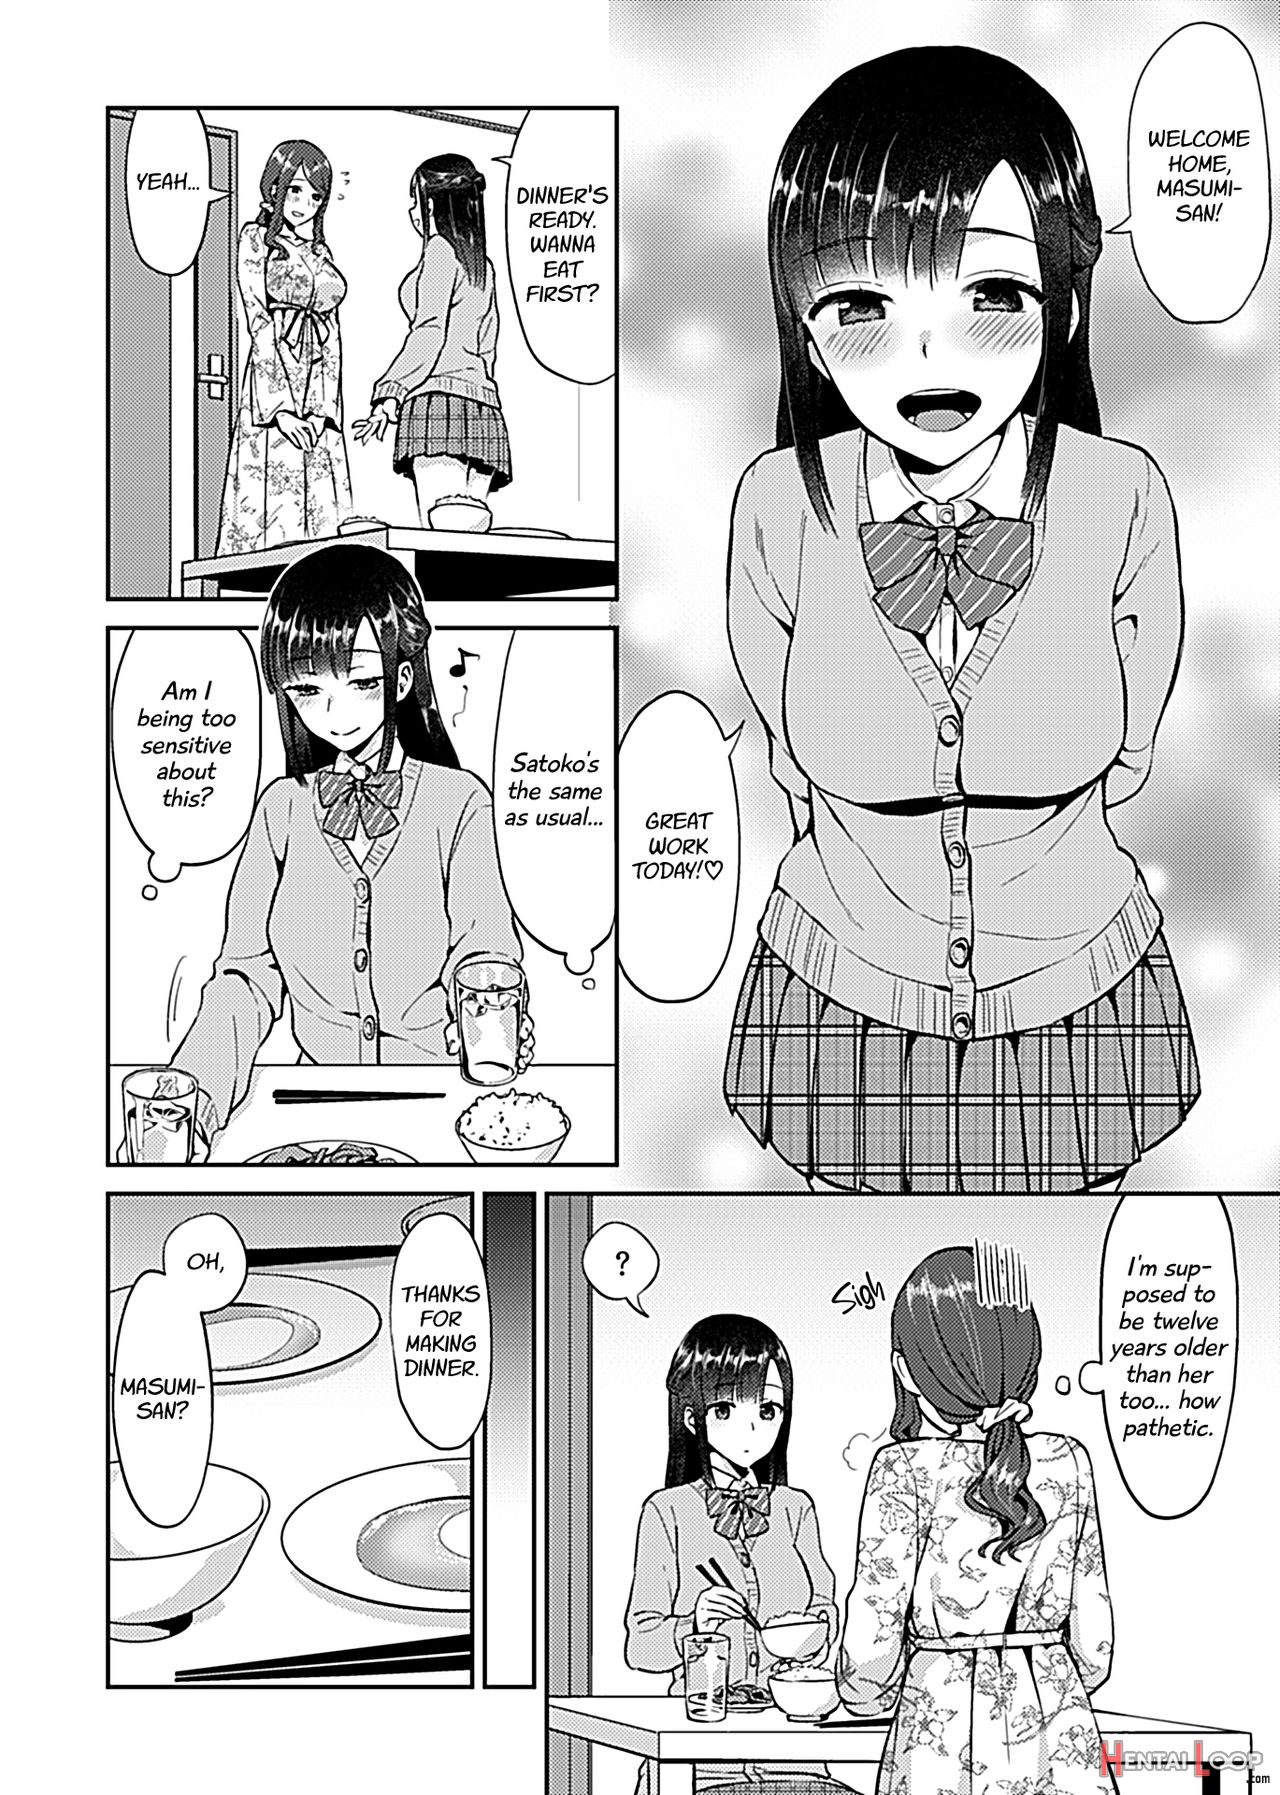 Lilies Are In Full Bloom - Volume 1 page 24